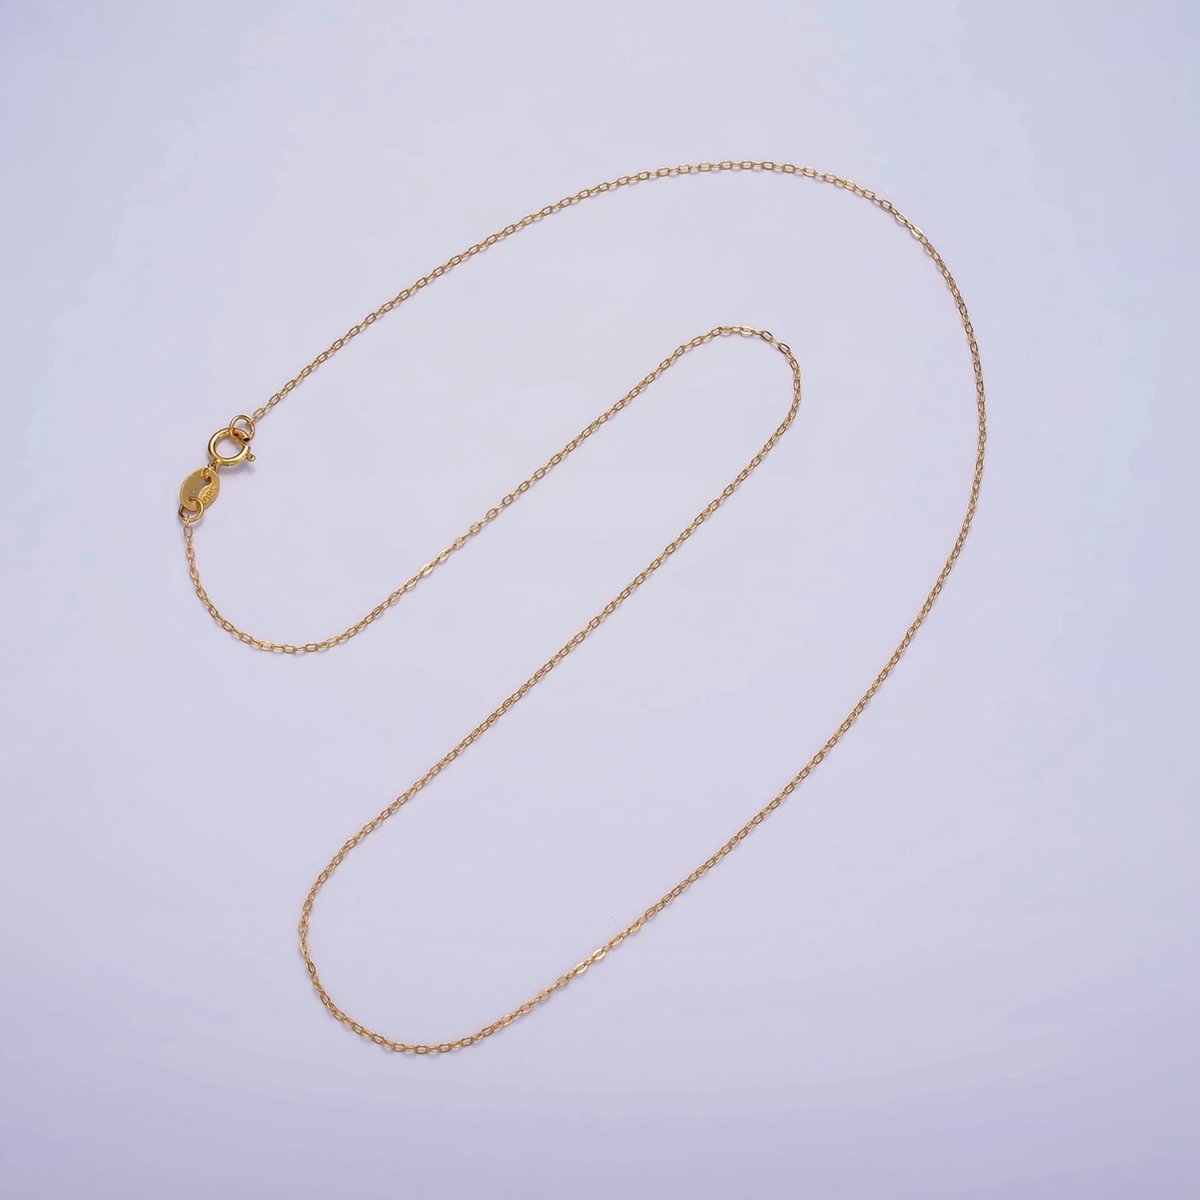 Dainty 24K Gold Vermeil Cable Chain Necklace 925 Sterling Silver Necklace Chain w/ Heavy 24K Gold Plated 15.35 inch | WA-1980 Clearance Pricing - DLUXCA